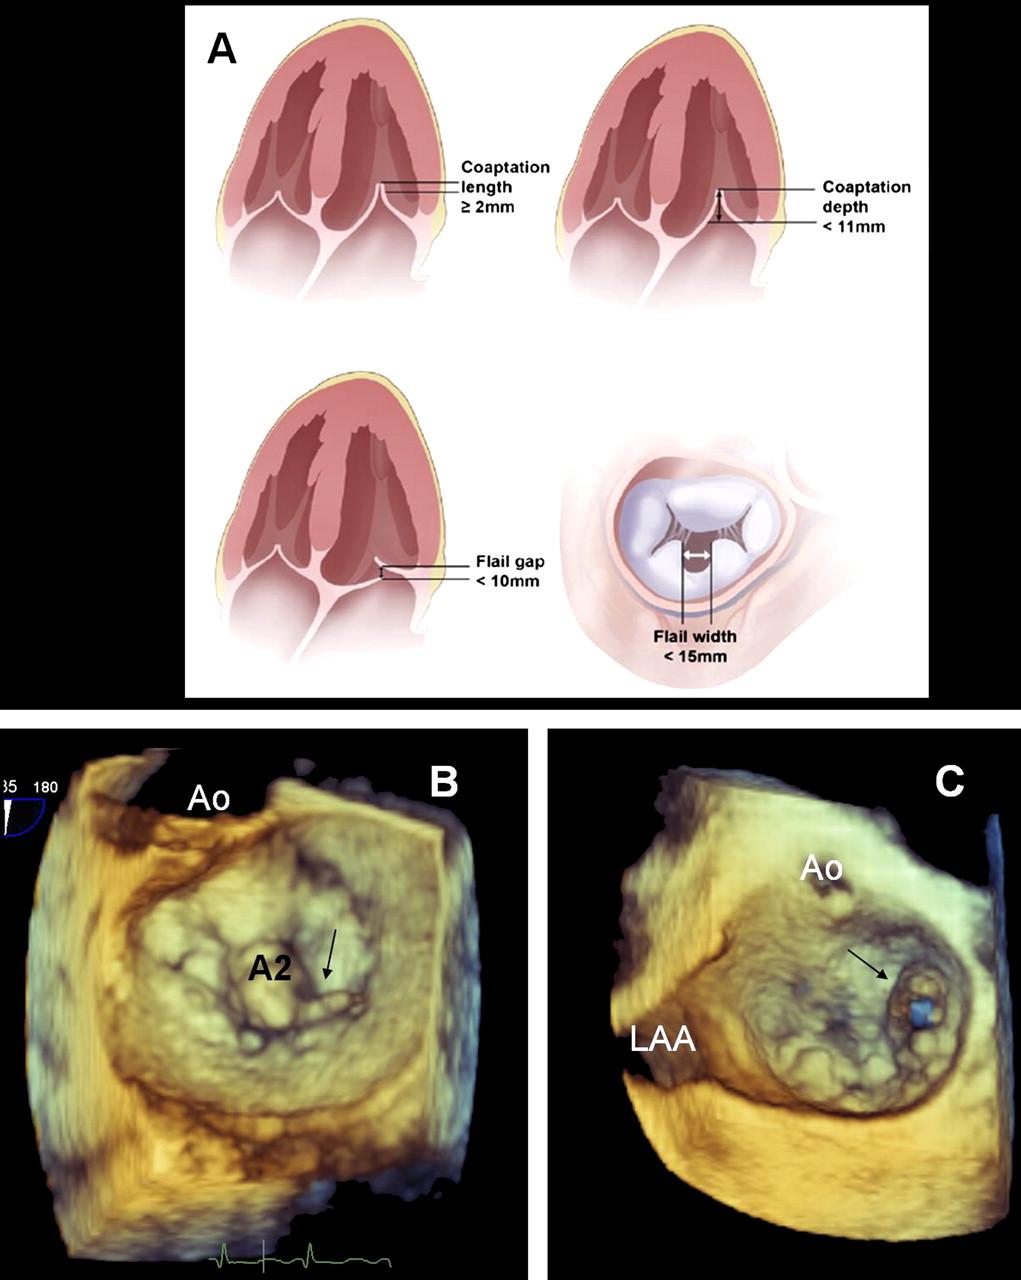 Characterisation of mitral valve lesion before transcatheter edge-to-edge mitral valve repair.